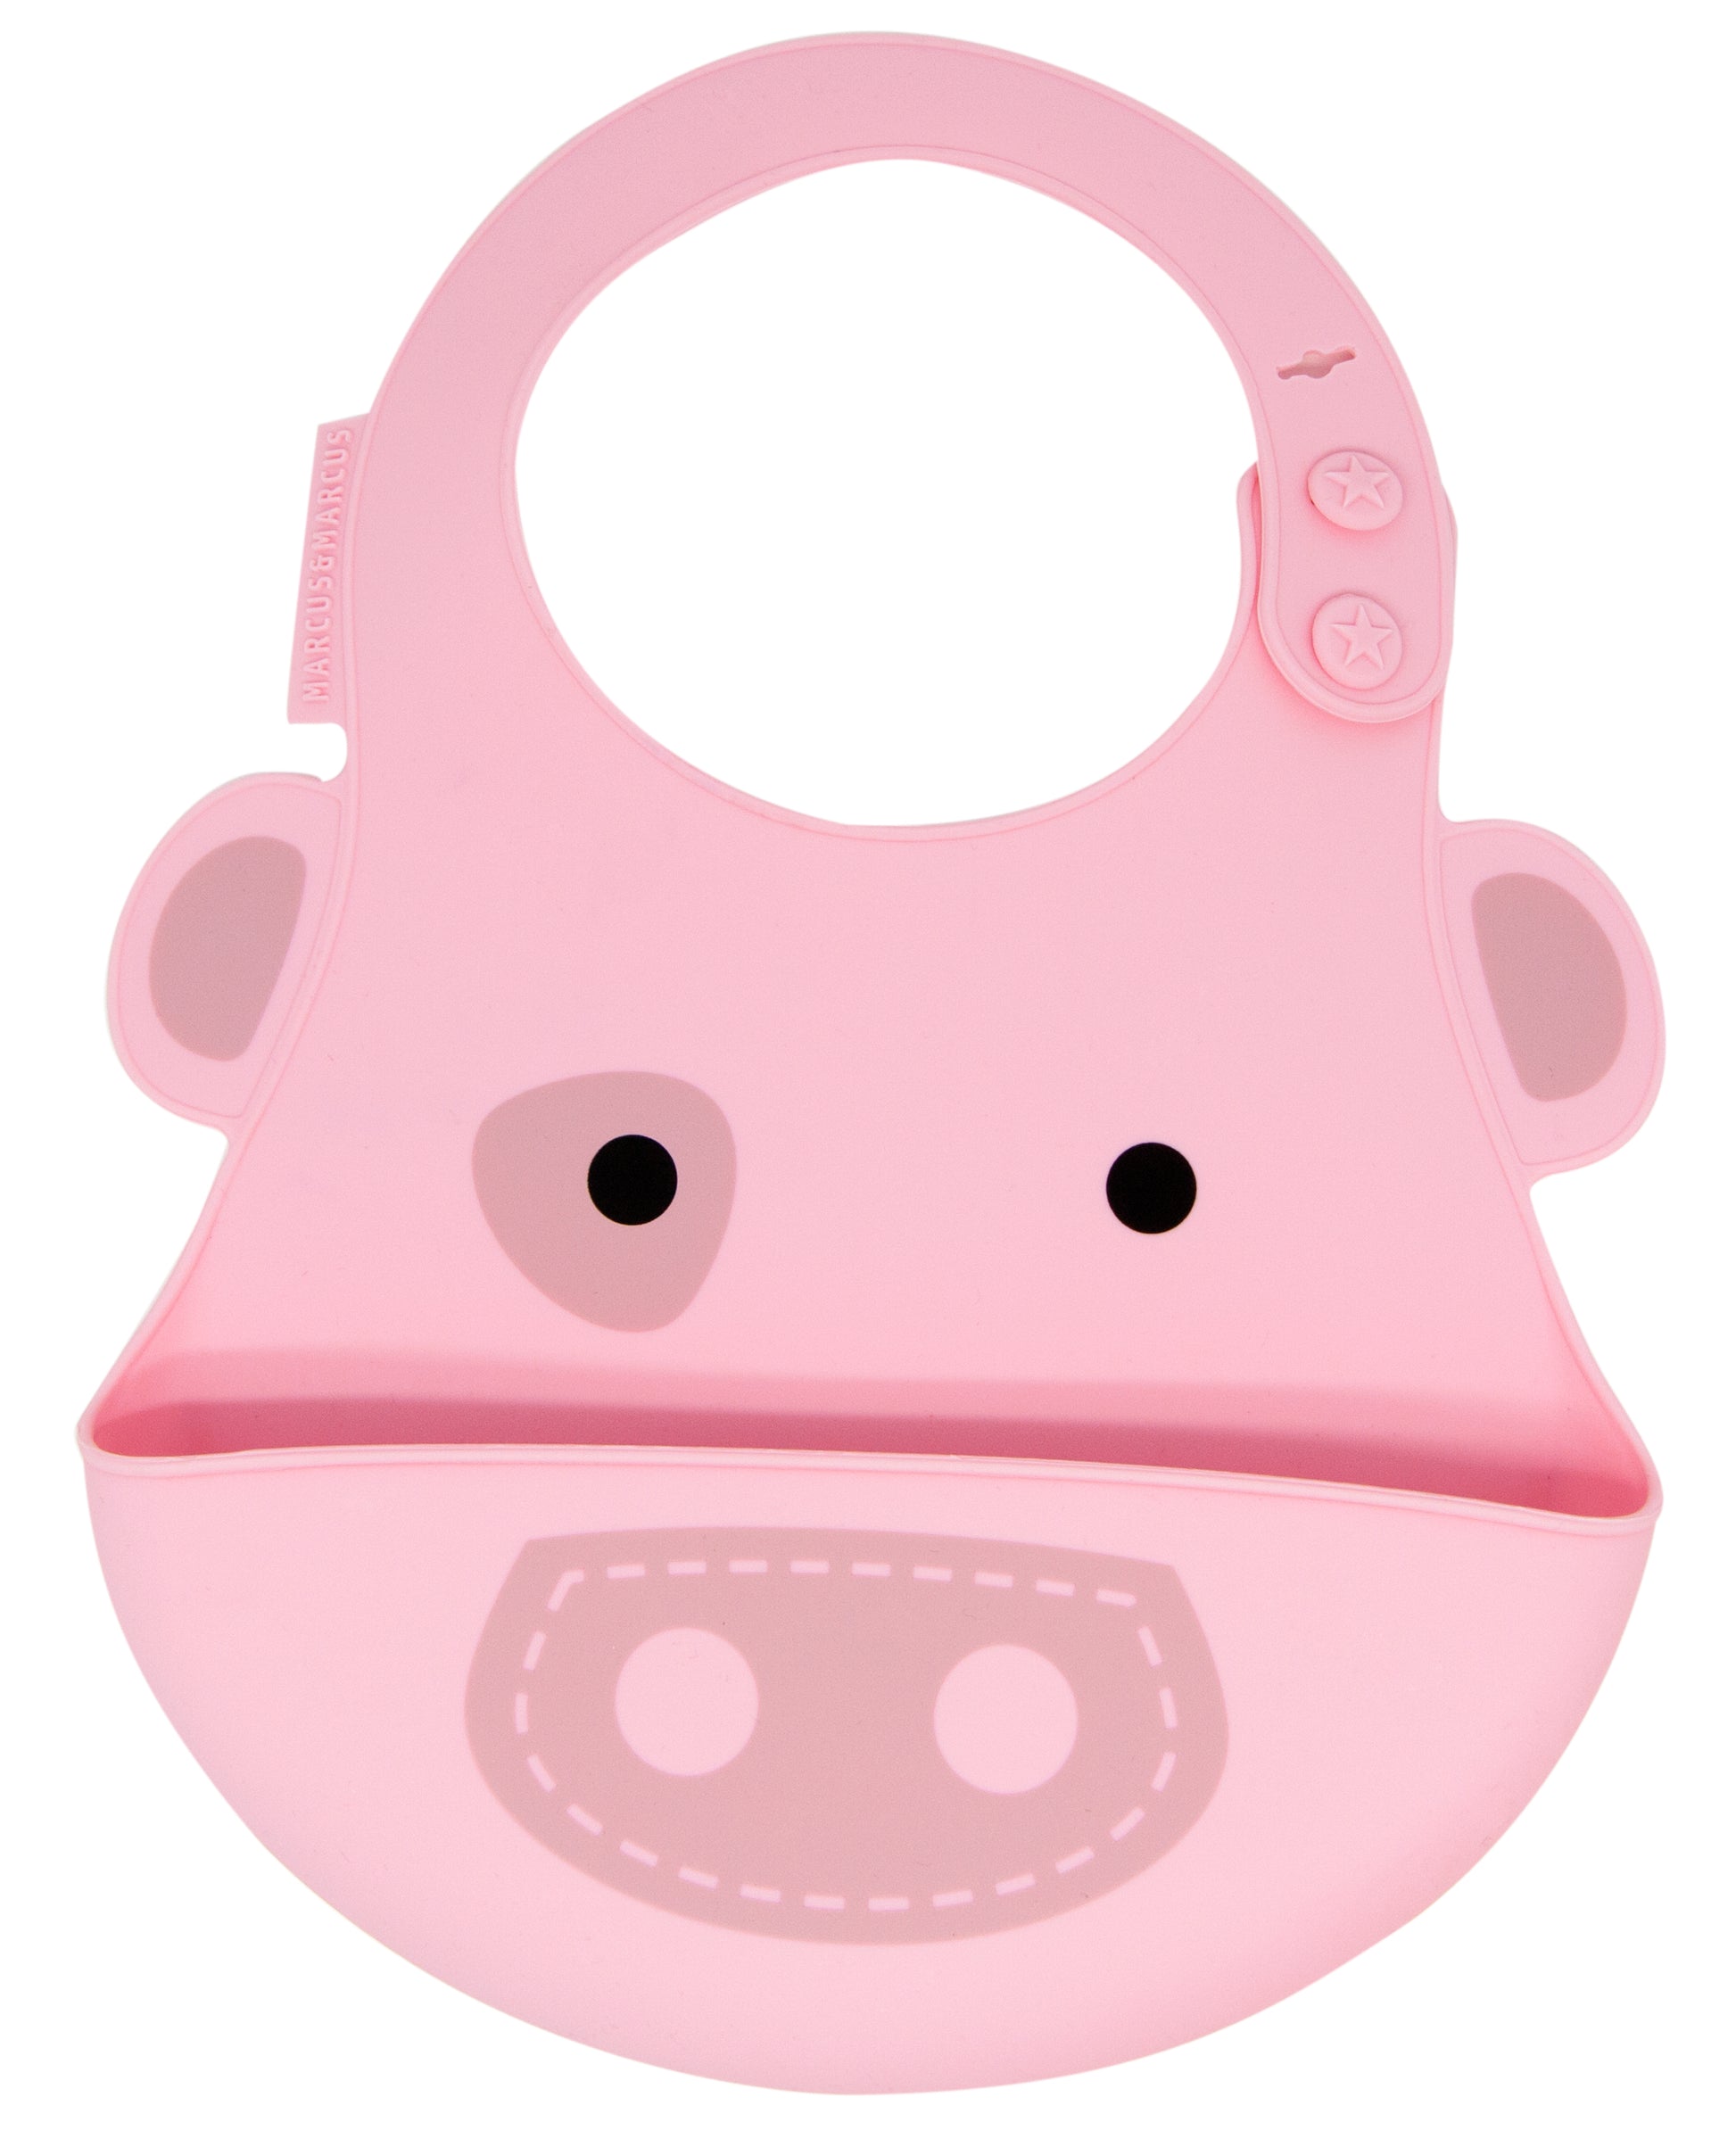 Marcus & Marcus soft silicone baby bibs BPA Phthalates free pink